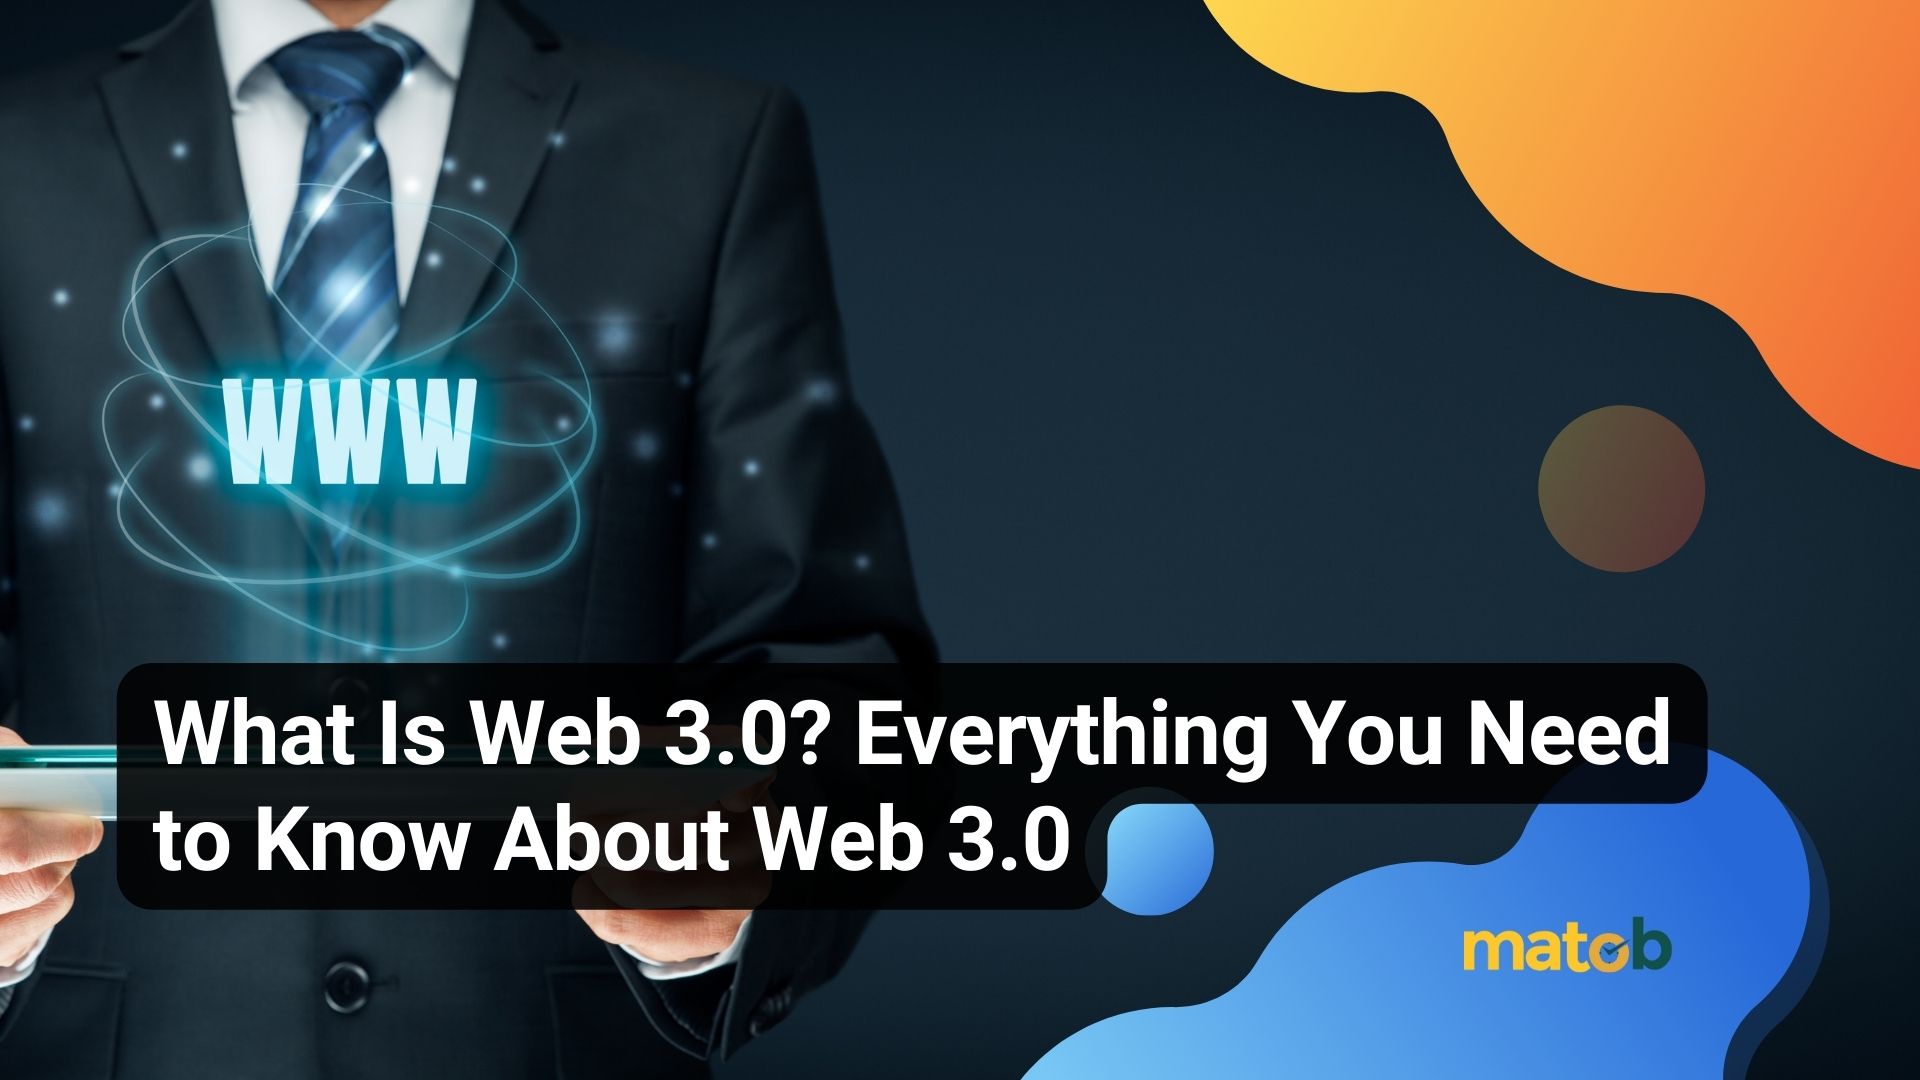 What Is Web 3.0? Everything You Need to Know About Web 3.0